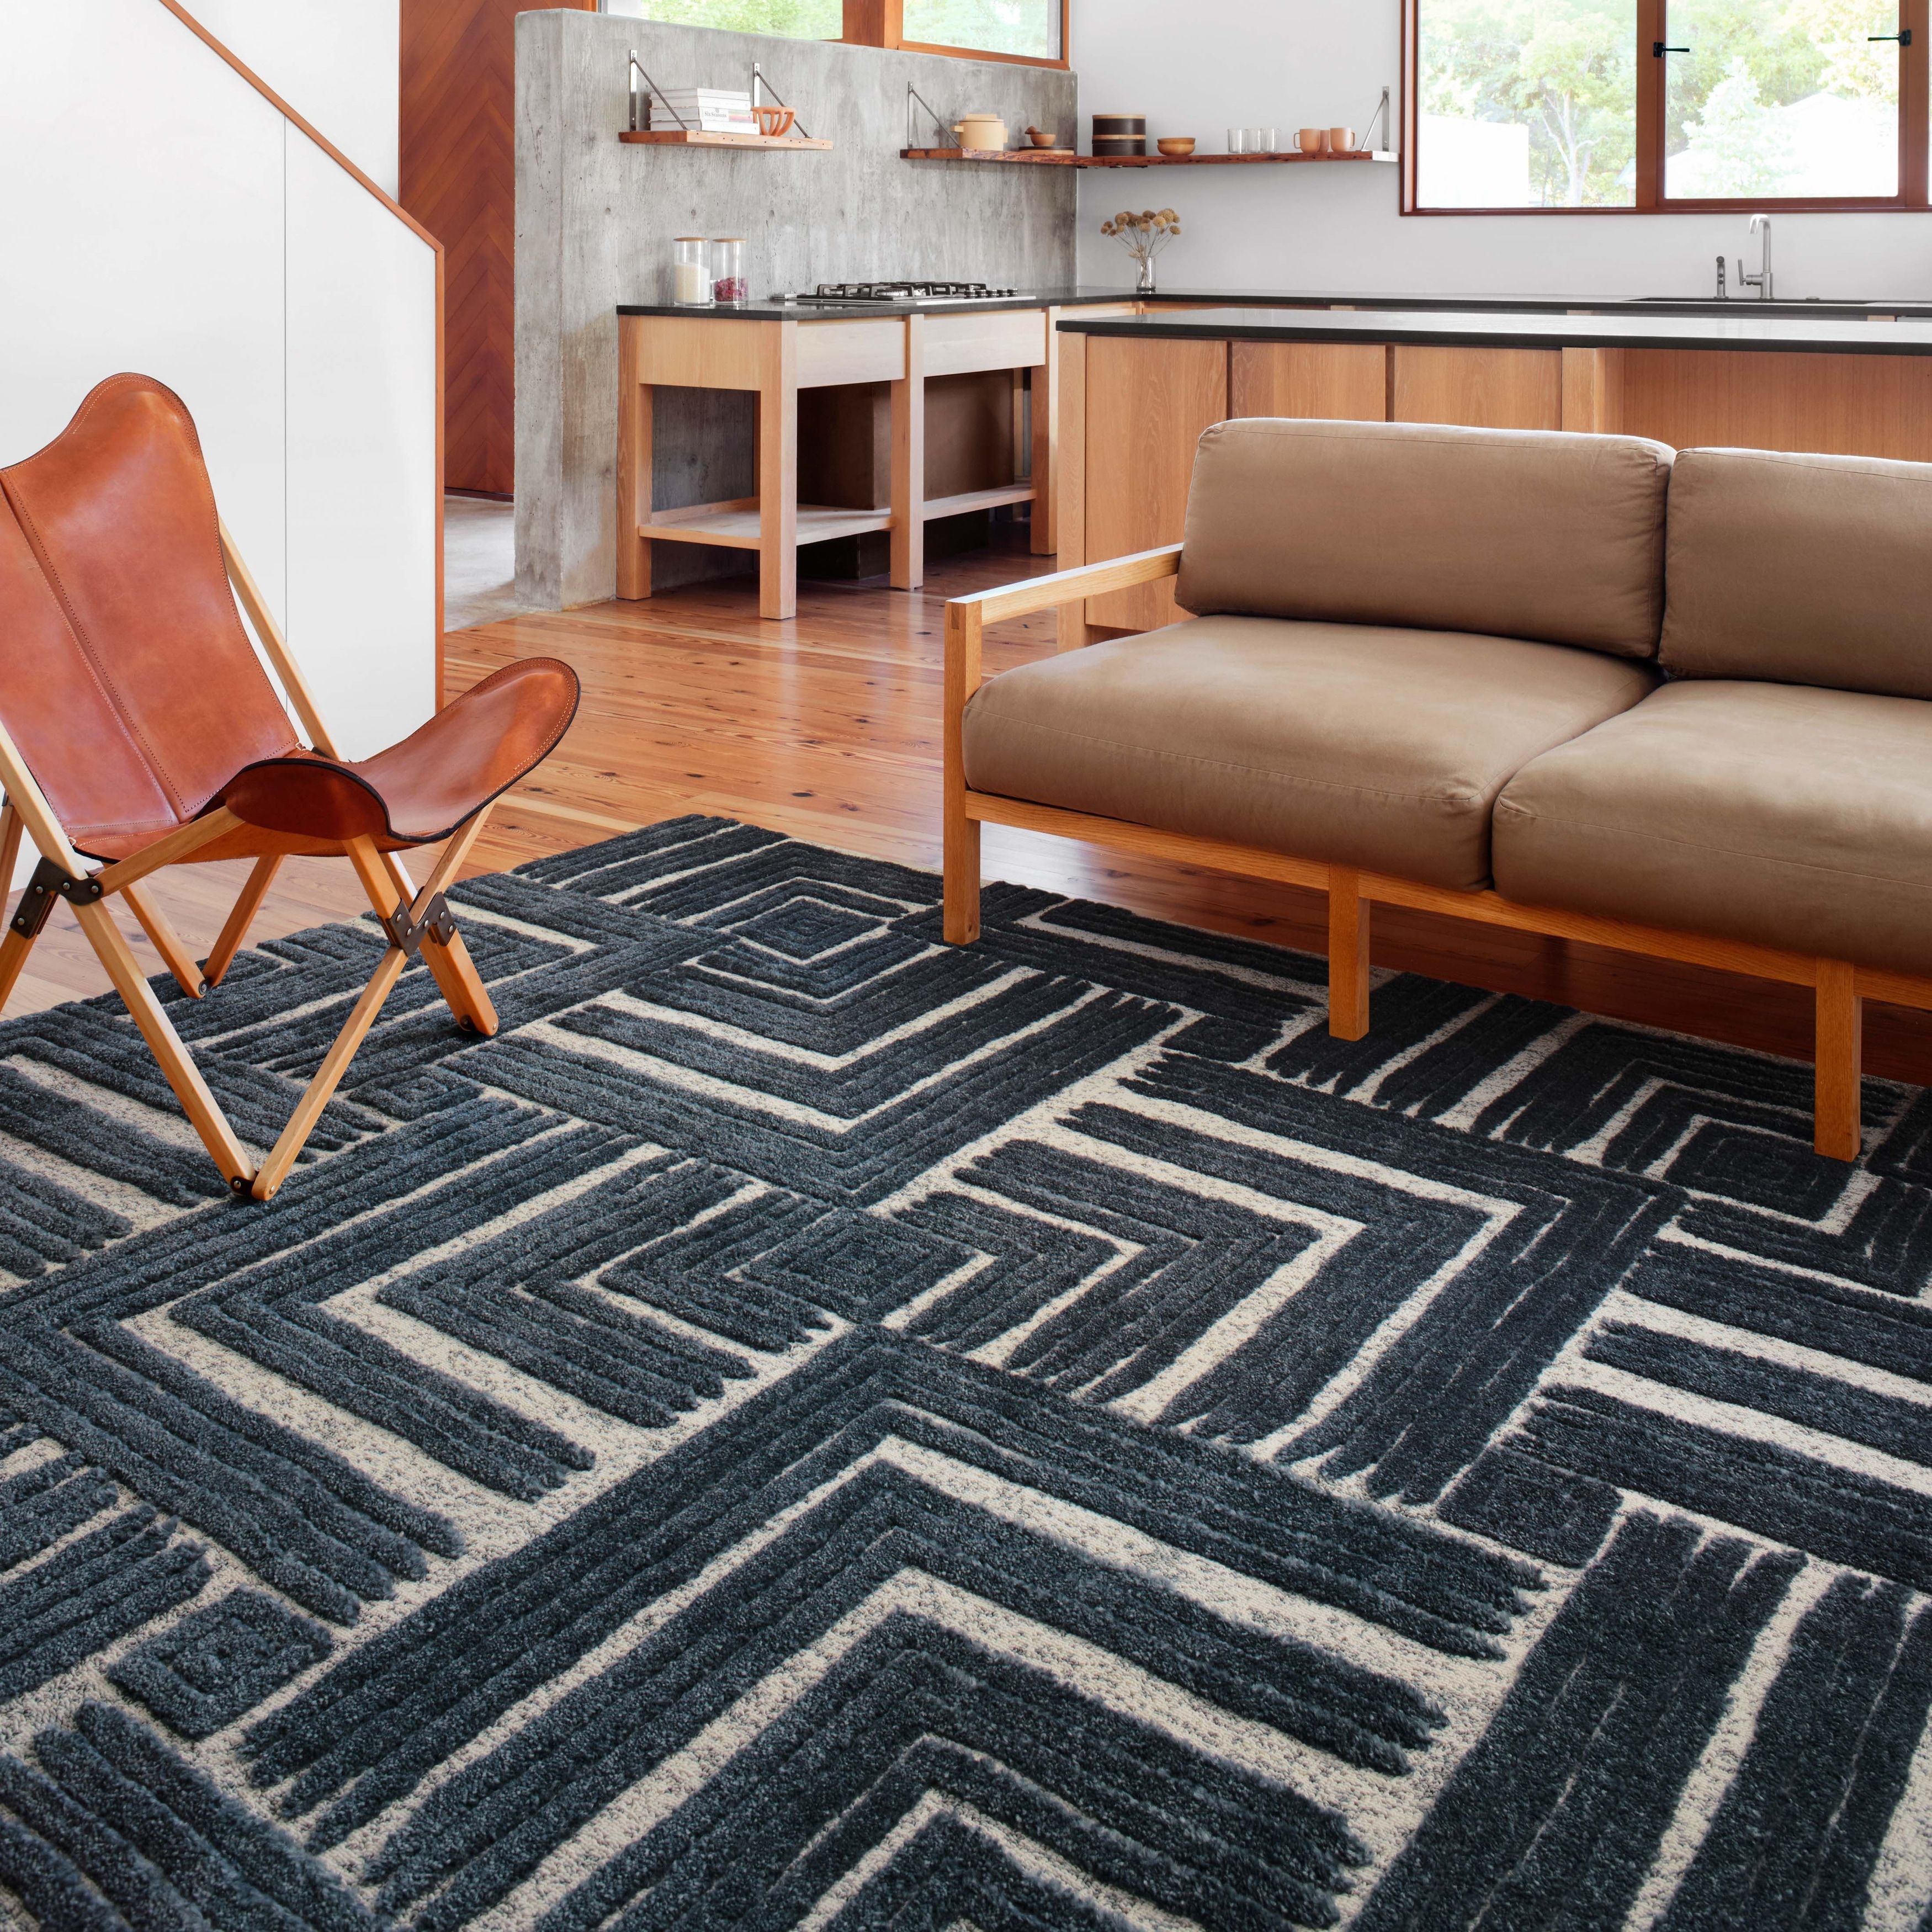 Alexander Home Vail Mid Century Modern Geometric Square Area Rug – On Sale  – Overstock – 31663956 Regarding Modern Square Rugs (View 2 of 15)